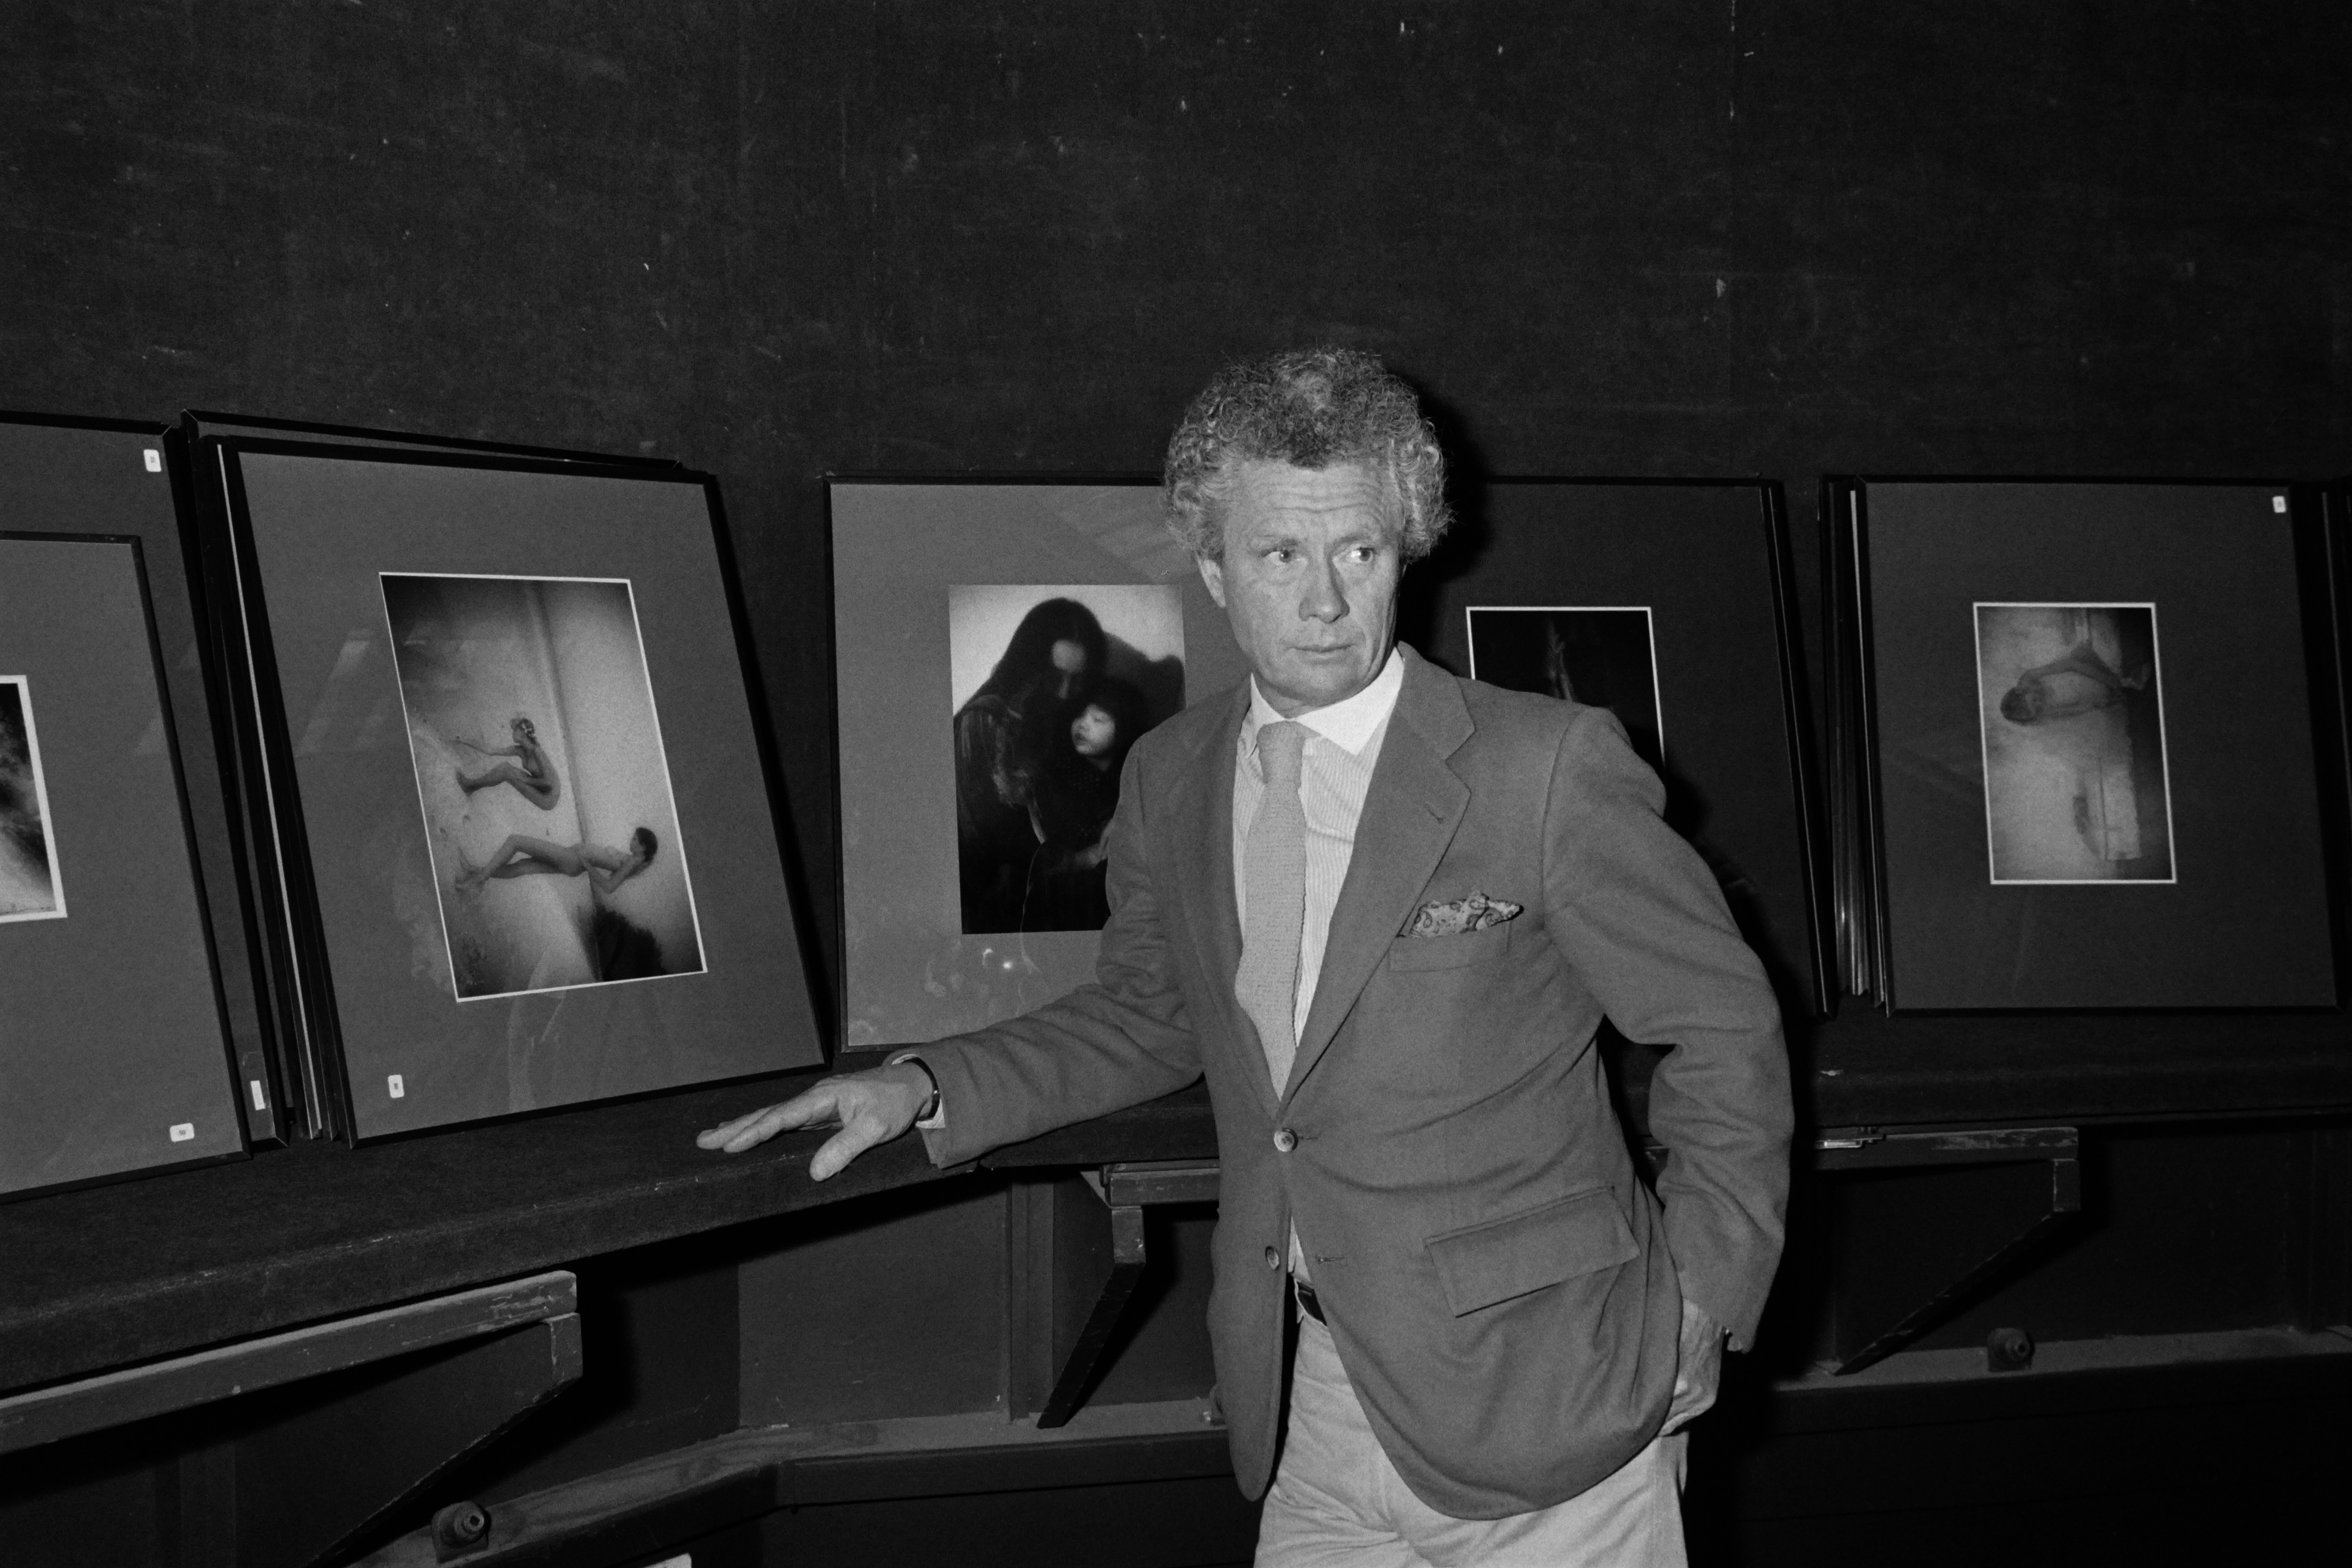 (FILES) This file photo taken on November 19, 1983 shows British photographer and film director David Hamilton posing in front of his work during a sale of his photos at the auction house Drouot in Paris British photographer David Hamilton was found dead at his home in Paris aged 83, on November 25, 2016. / AFP PHOTO / Pierre VERDY